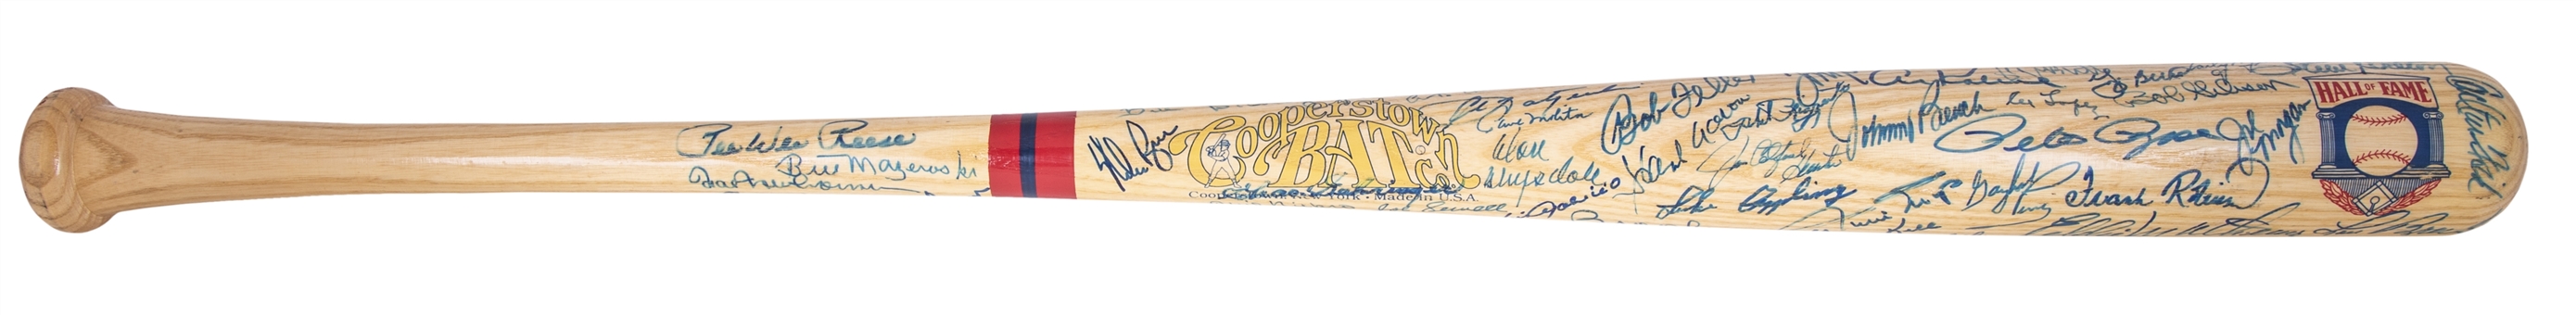 Incredible Hall of Fame Multi-Signed Bat with 75+ Signatures Incl. Mickey Mantle, Ted Williams, Koufax, Mays, Aaron and Kirby Puckett All Personally Obtained by Gene "Stick" Michael (JSA)